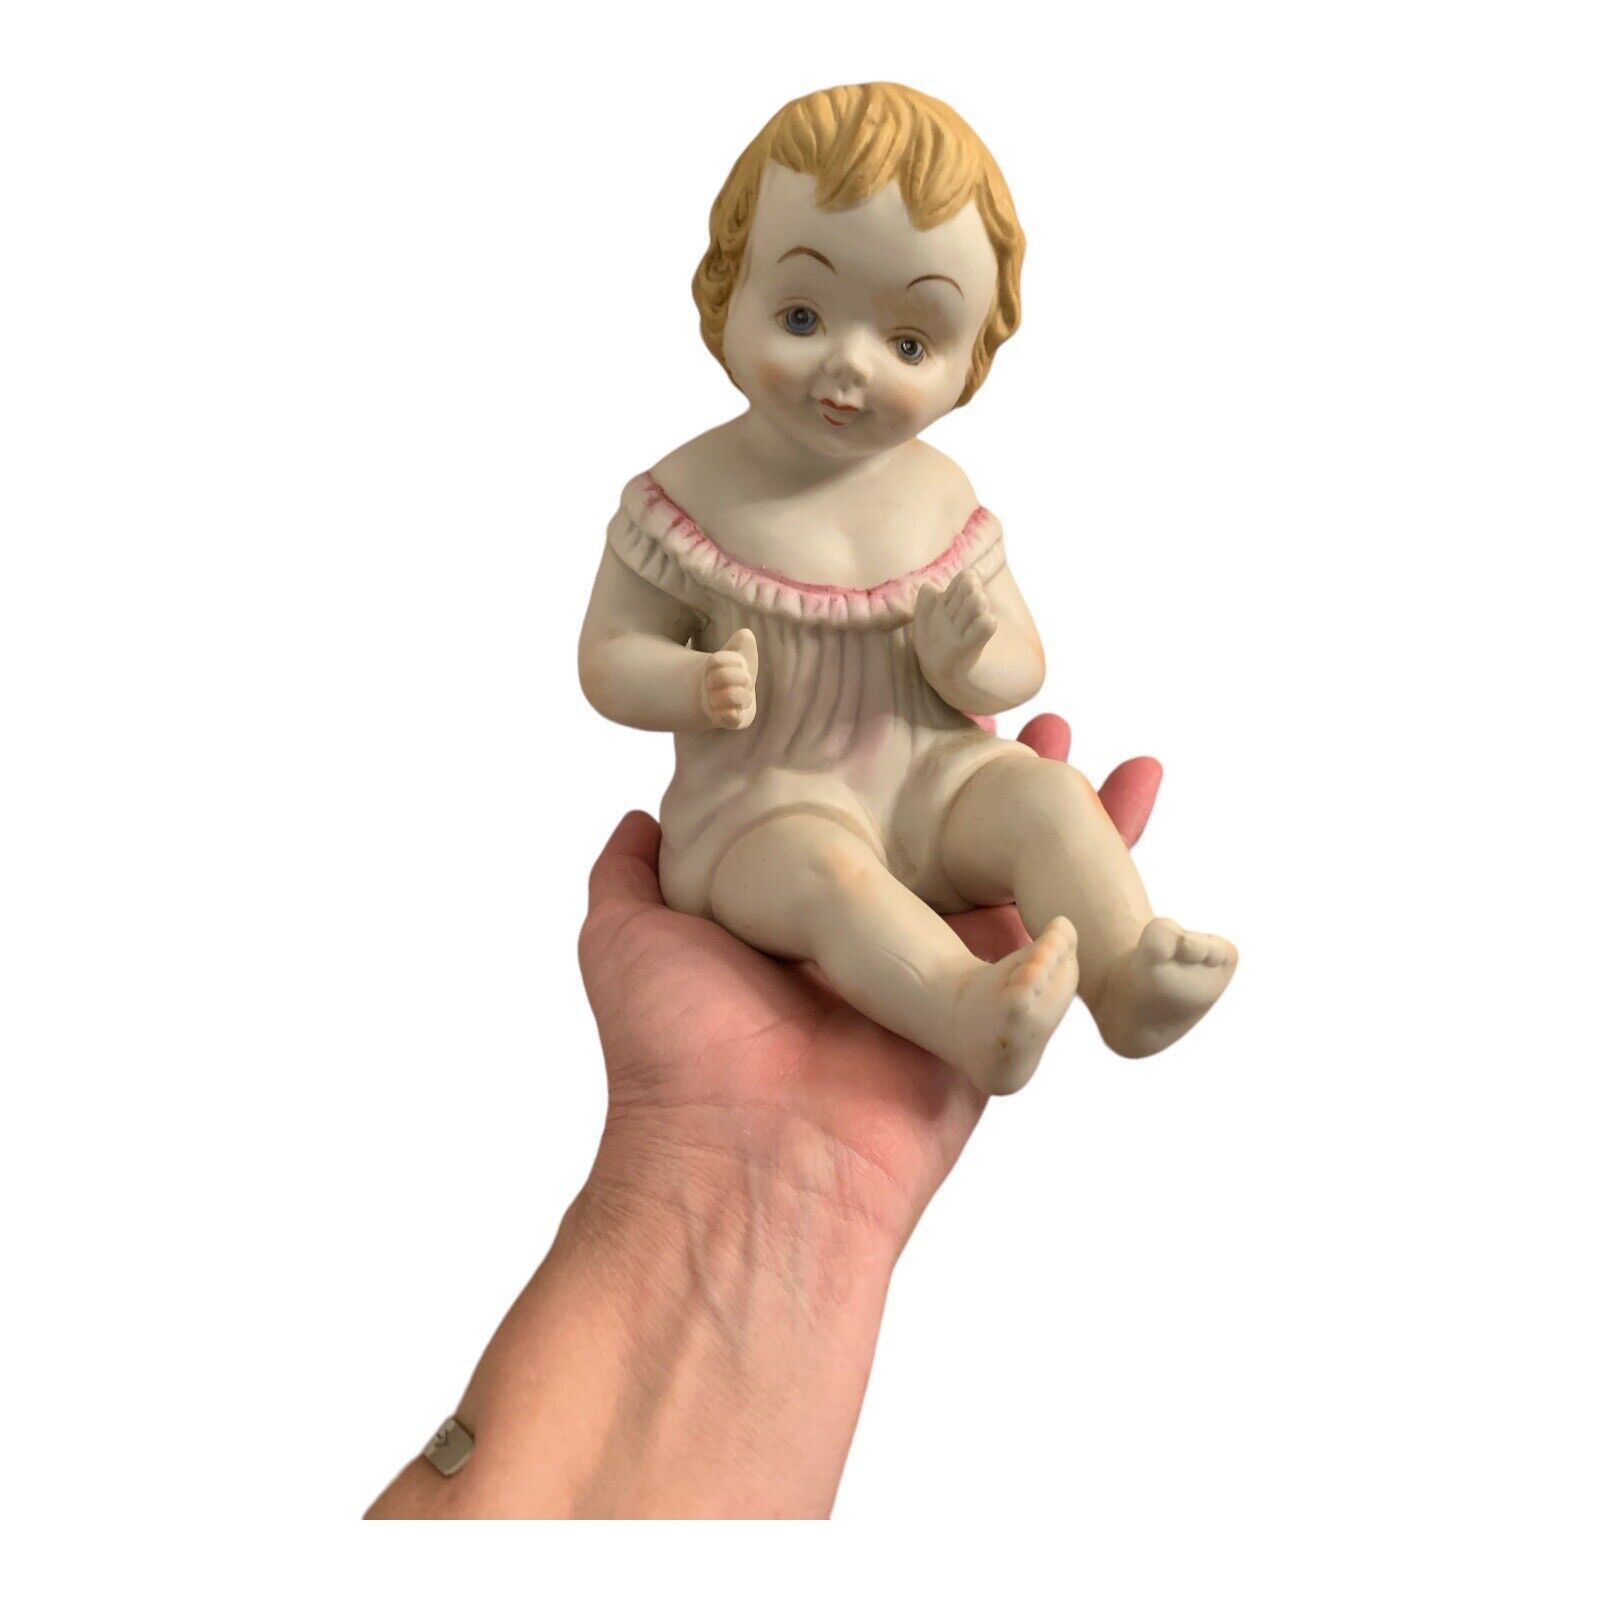 Vintage Porcelain Bisque Piano Baby Figurine Sitting, Piano Baby